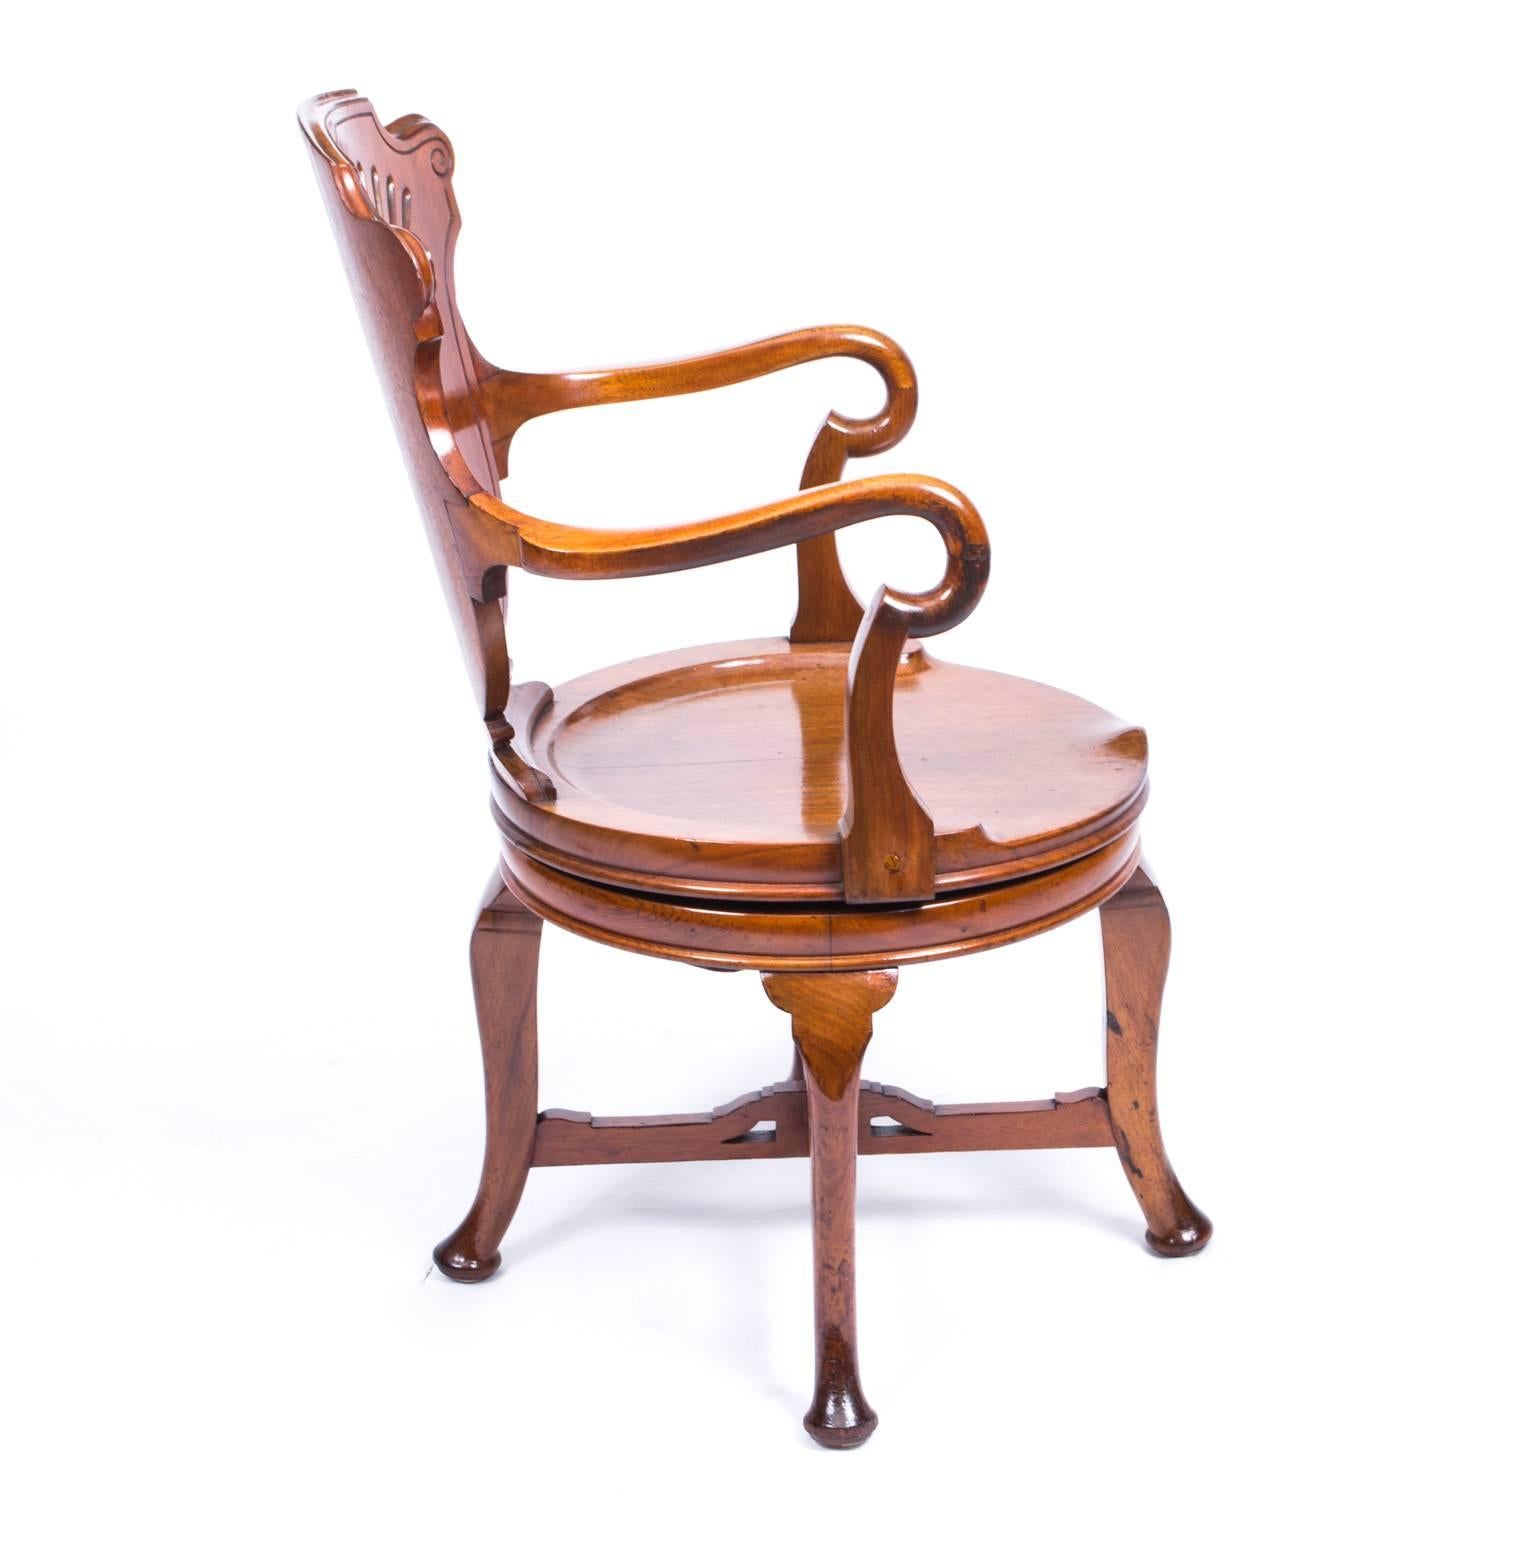 This is a superb antique late 19th century walnut revolving desk chair. 

It is made of very high quality solid solid walnut with a beautiful and decorative shell carved back with shepherd's crook arms and saddle seat. It is raised on cabriole